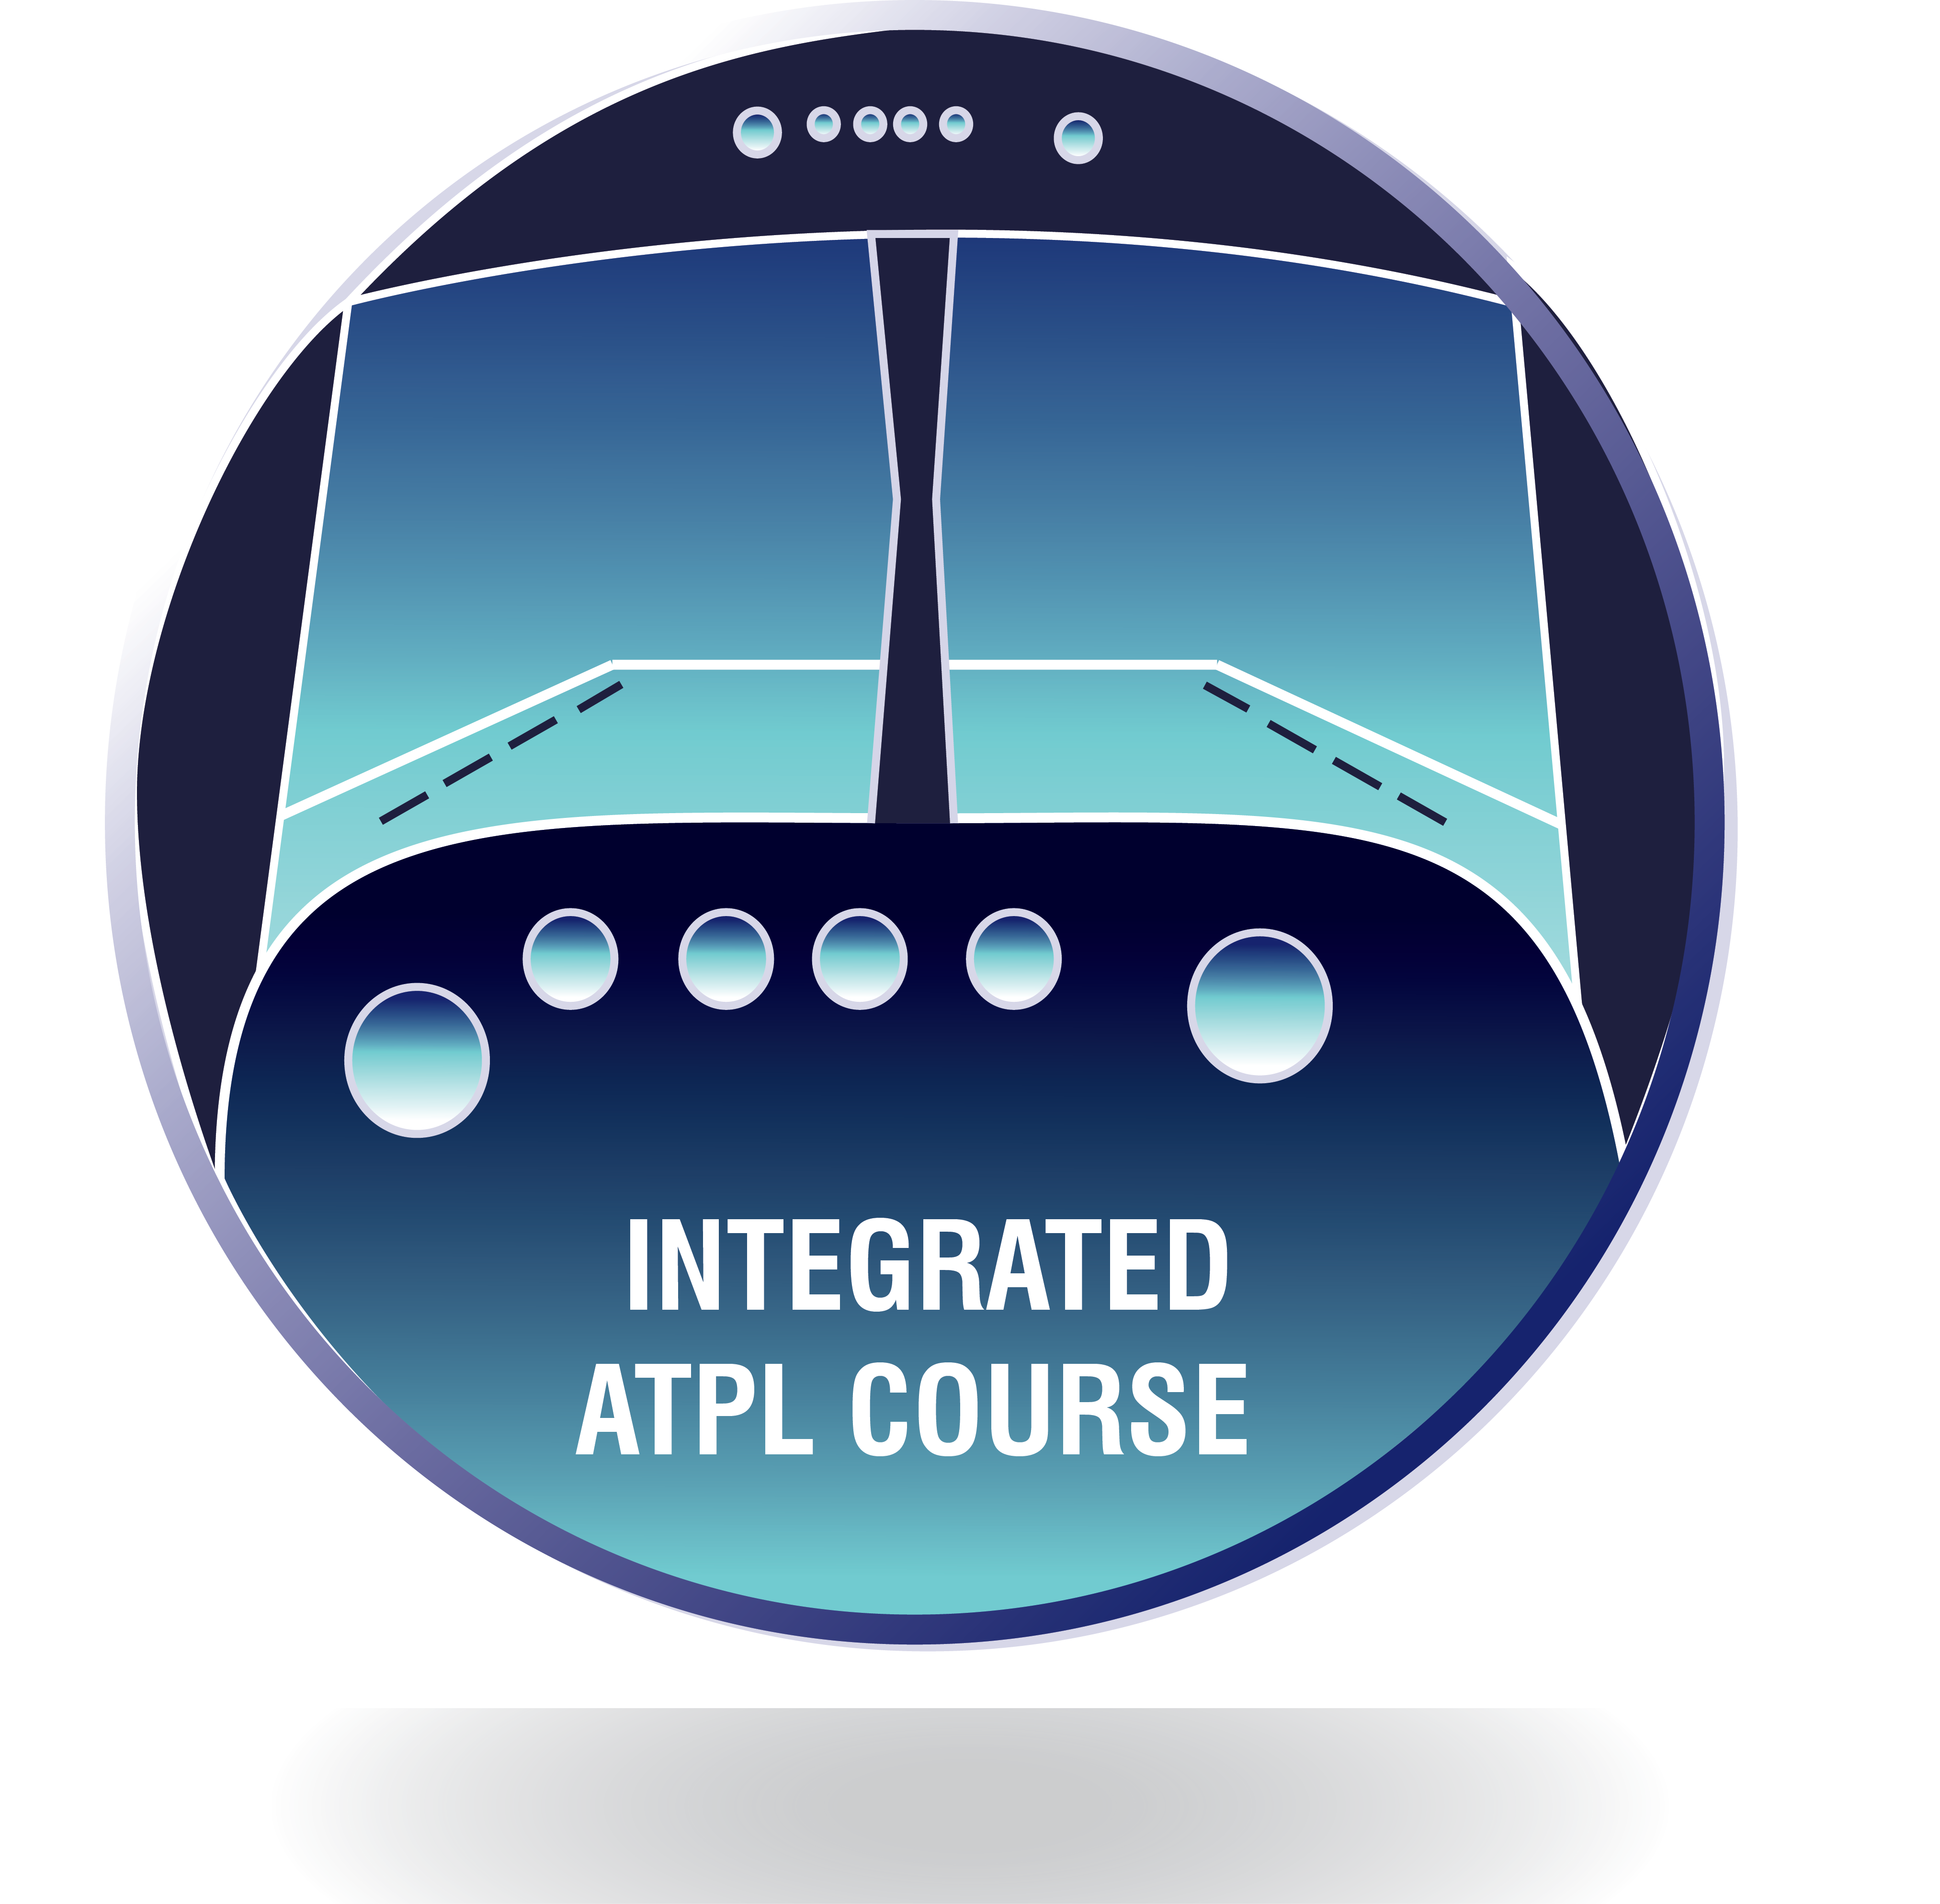 APTL Integrated Course Tab